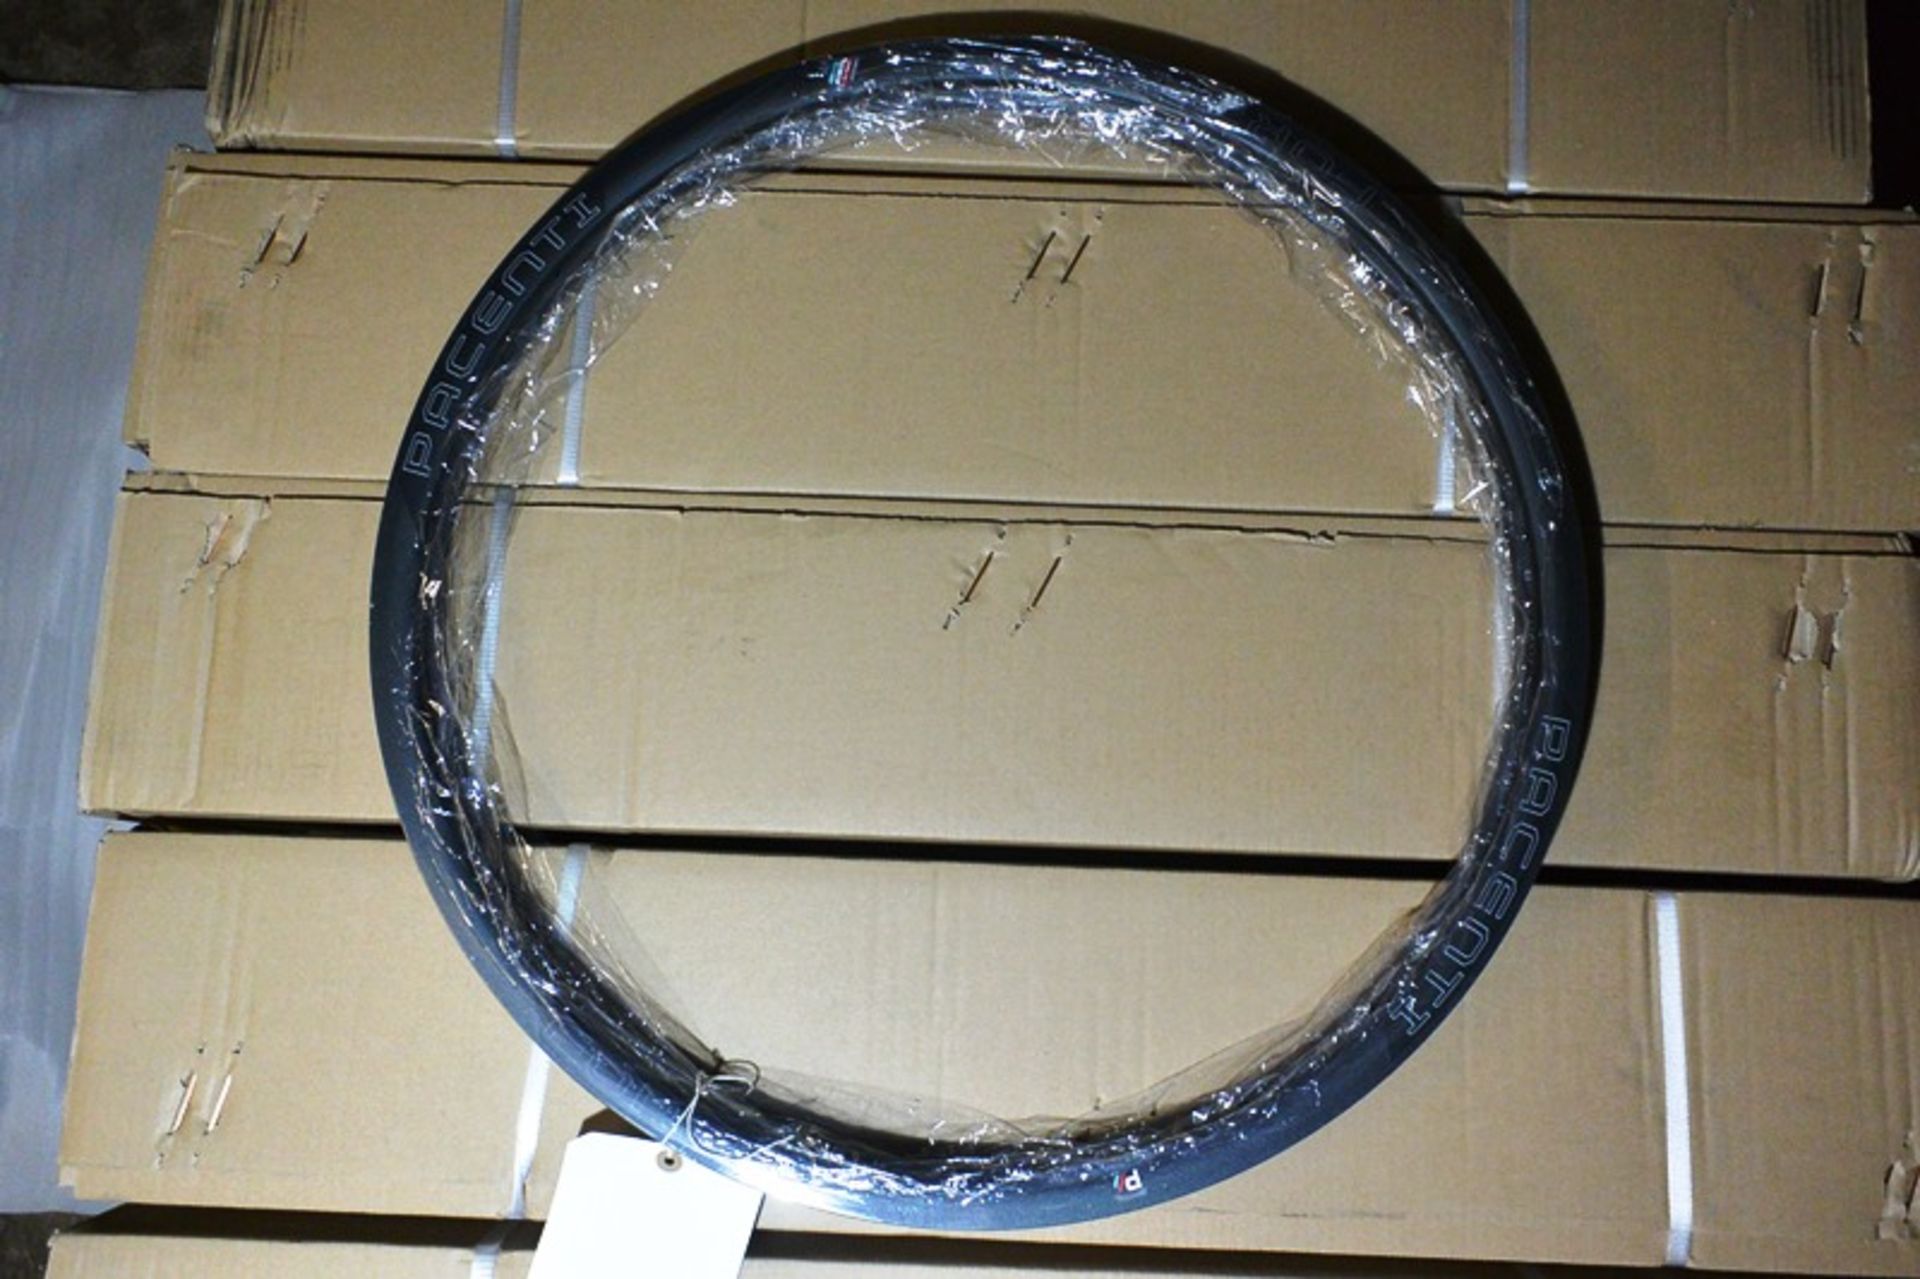 Pagenti Forza cycle wheel rims - Image 2 of 2